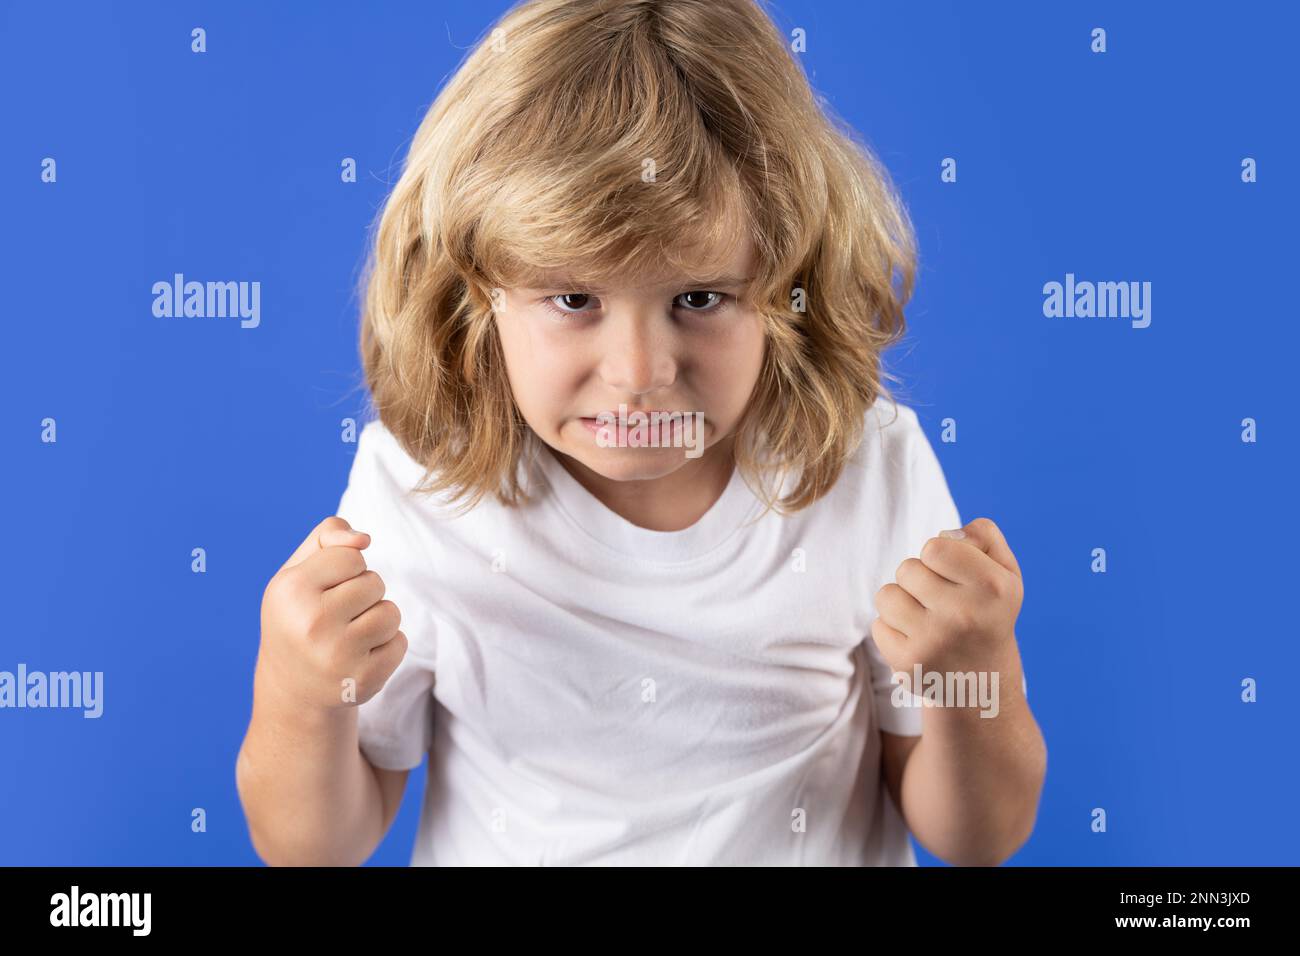 Child with angry expression. Angry hateful little boy, child furious. Angry rage kids face. Anger child with furious negative emotion portrait Stock Photo